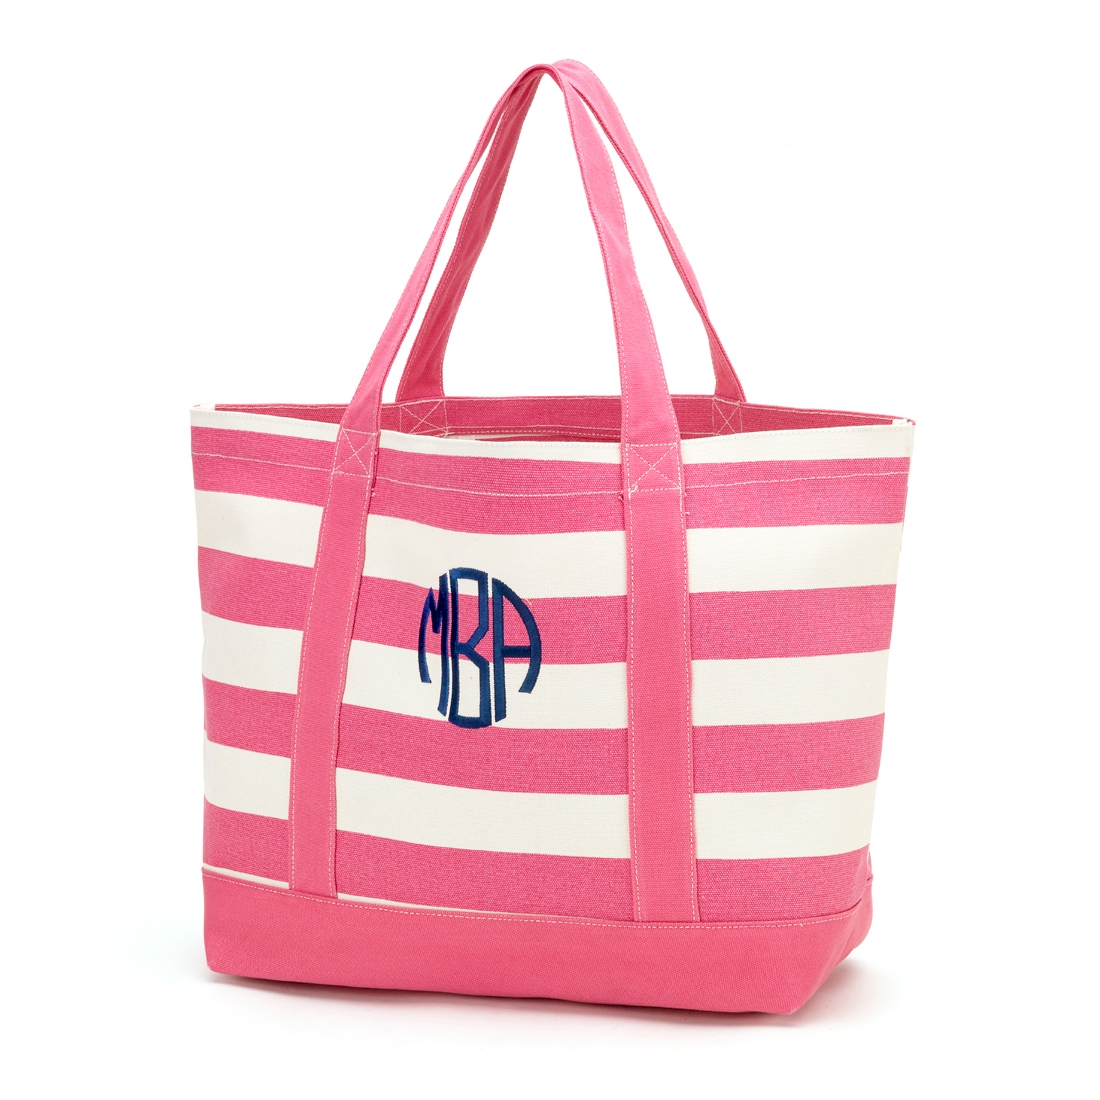 Canvas Tote Bag Embroidery Blanks - HOT PINK STRIPE - CLOSEOUT